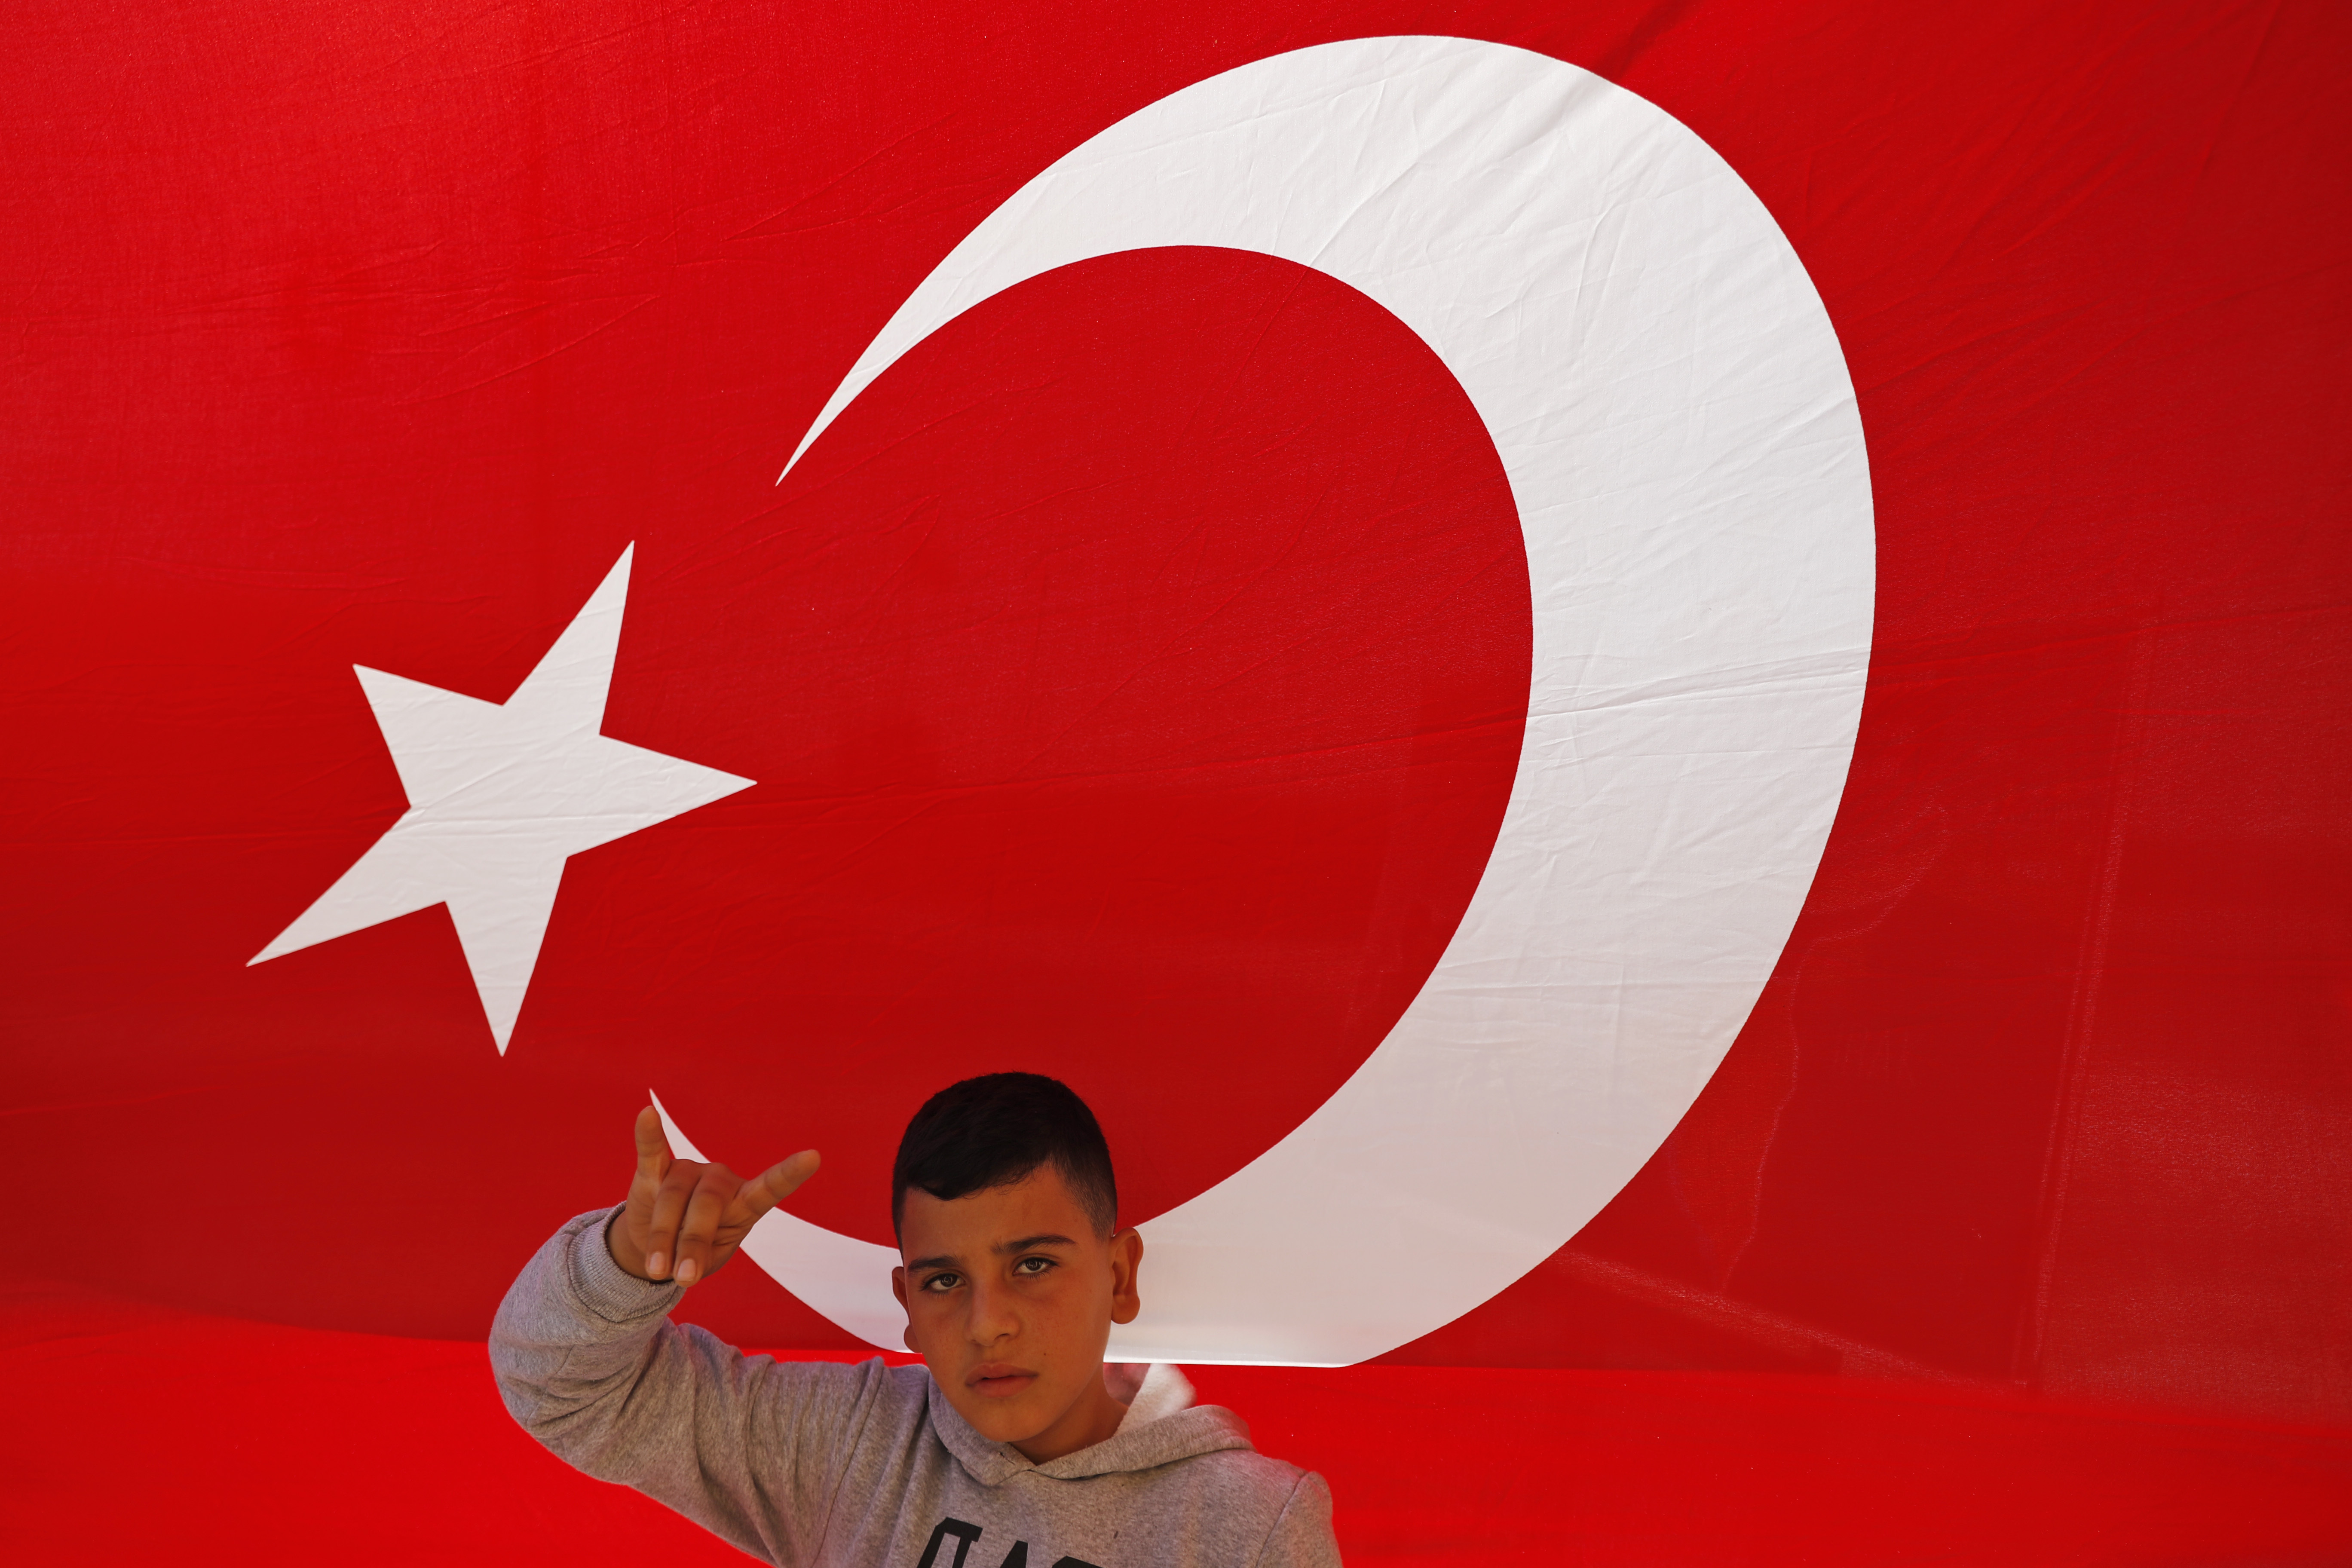 A youth flashes a hand gesture representing the Turkish far-right gray wolves organisation as he stands by a flag of Turkey's Nationalist Movement Party (MHP) at the Turkish side of the border between Turkey and Syria, in Akcakale, Sanliurfa province, southeastern Turkey, Tuesday, Oct. 8, 2019. Turkey's vice president Fuat Oktay says his country won't bow to threats in an apparent response to U.S. President Donald Trump's warning to Ankara about the scope of its planned military incursion into Syria. (AP Photo/Lefteris Pitarakis)